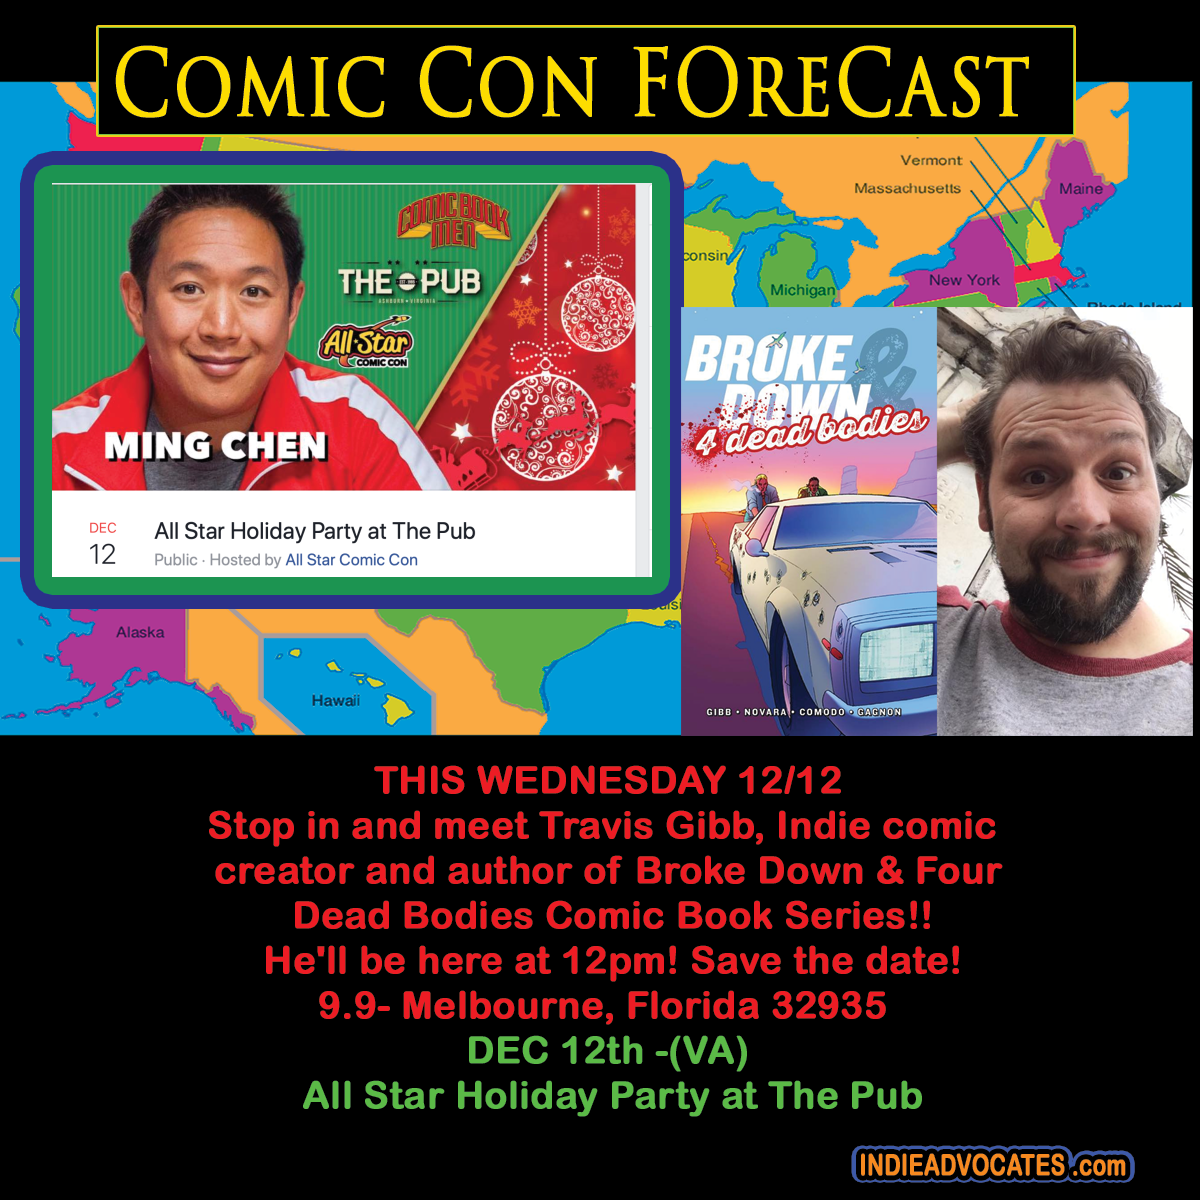 THE COMIC CON HIGHWAY WEEKDAY FORECAST:: ::Dec-12th:: All Star Holiday Party at The Pub & Travis Gibb Signing Event in